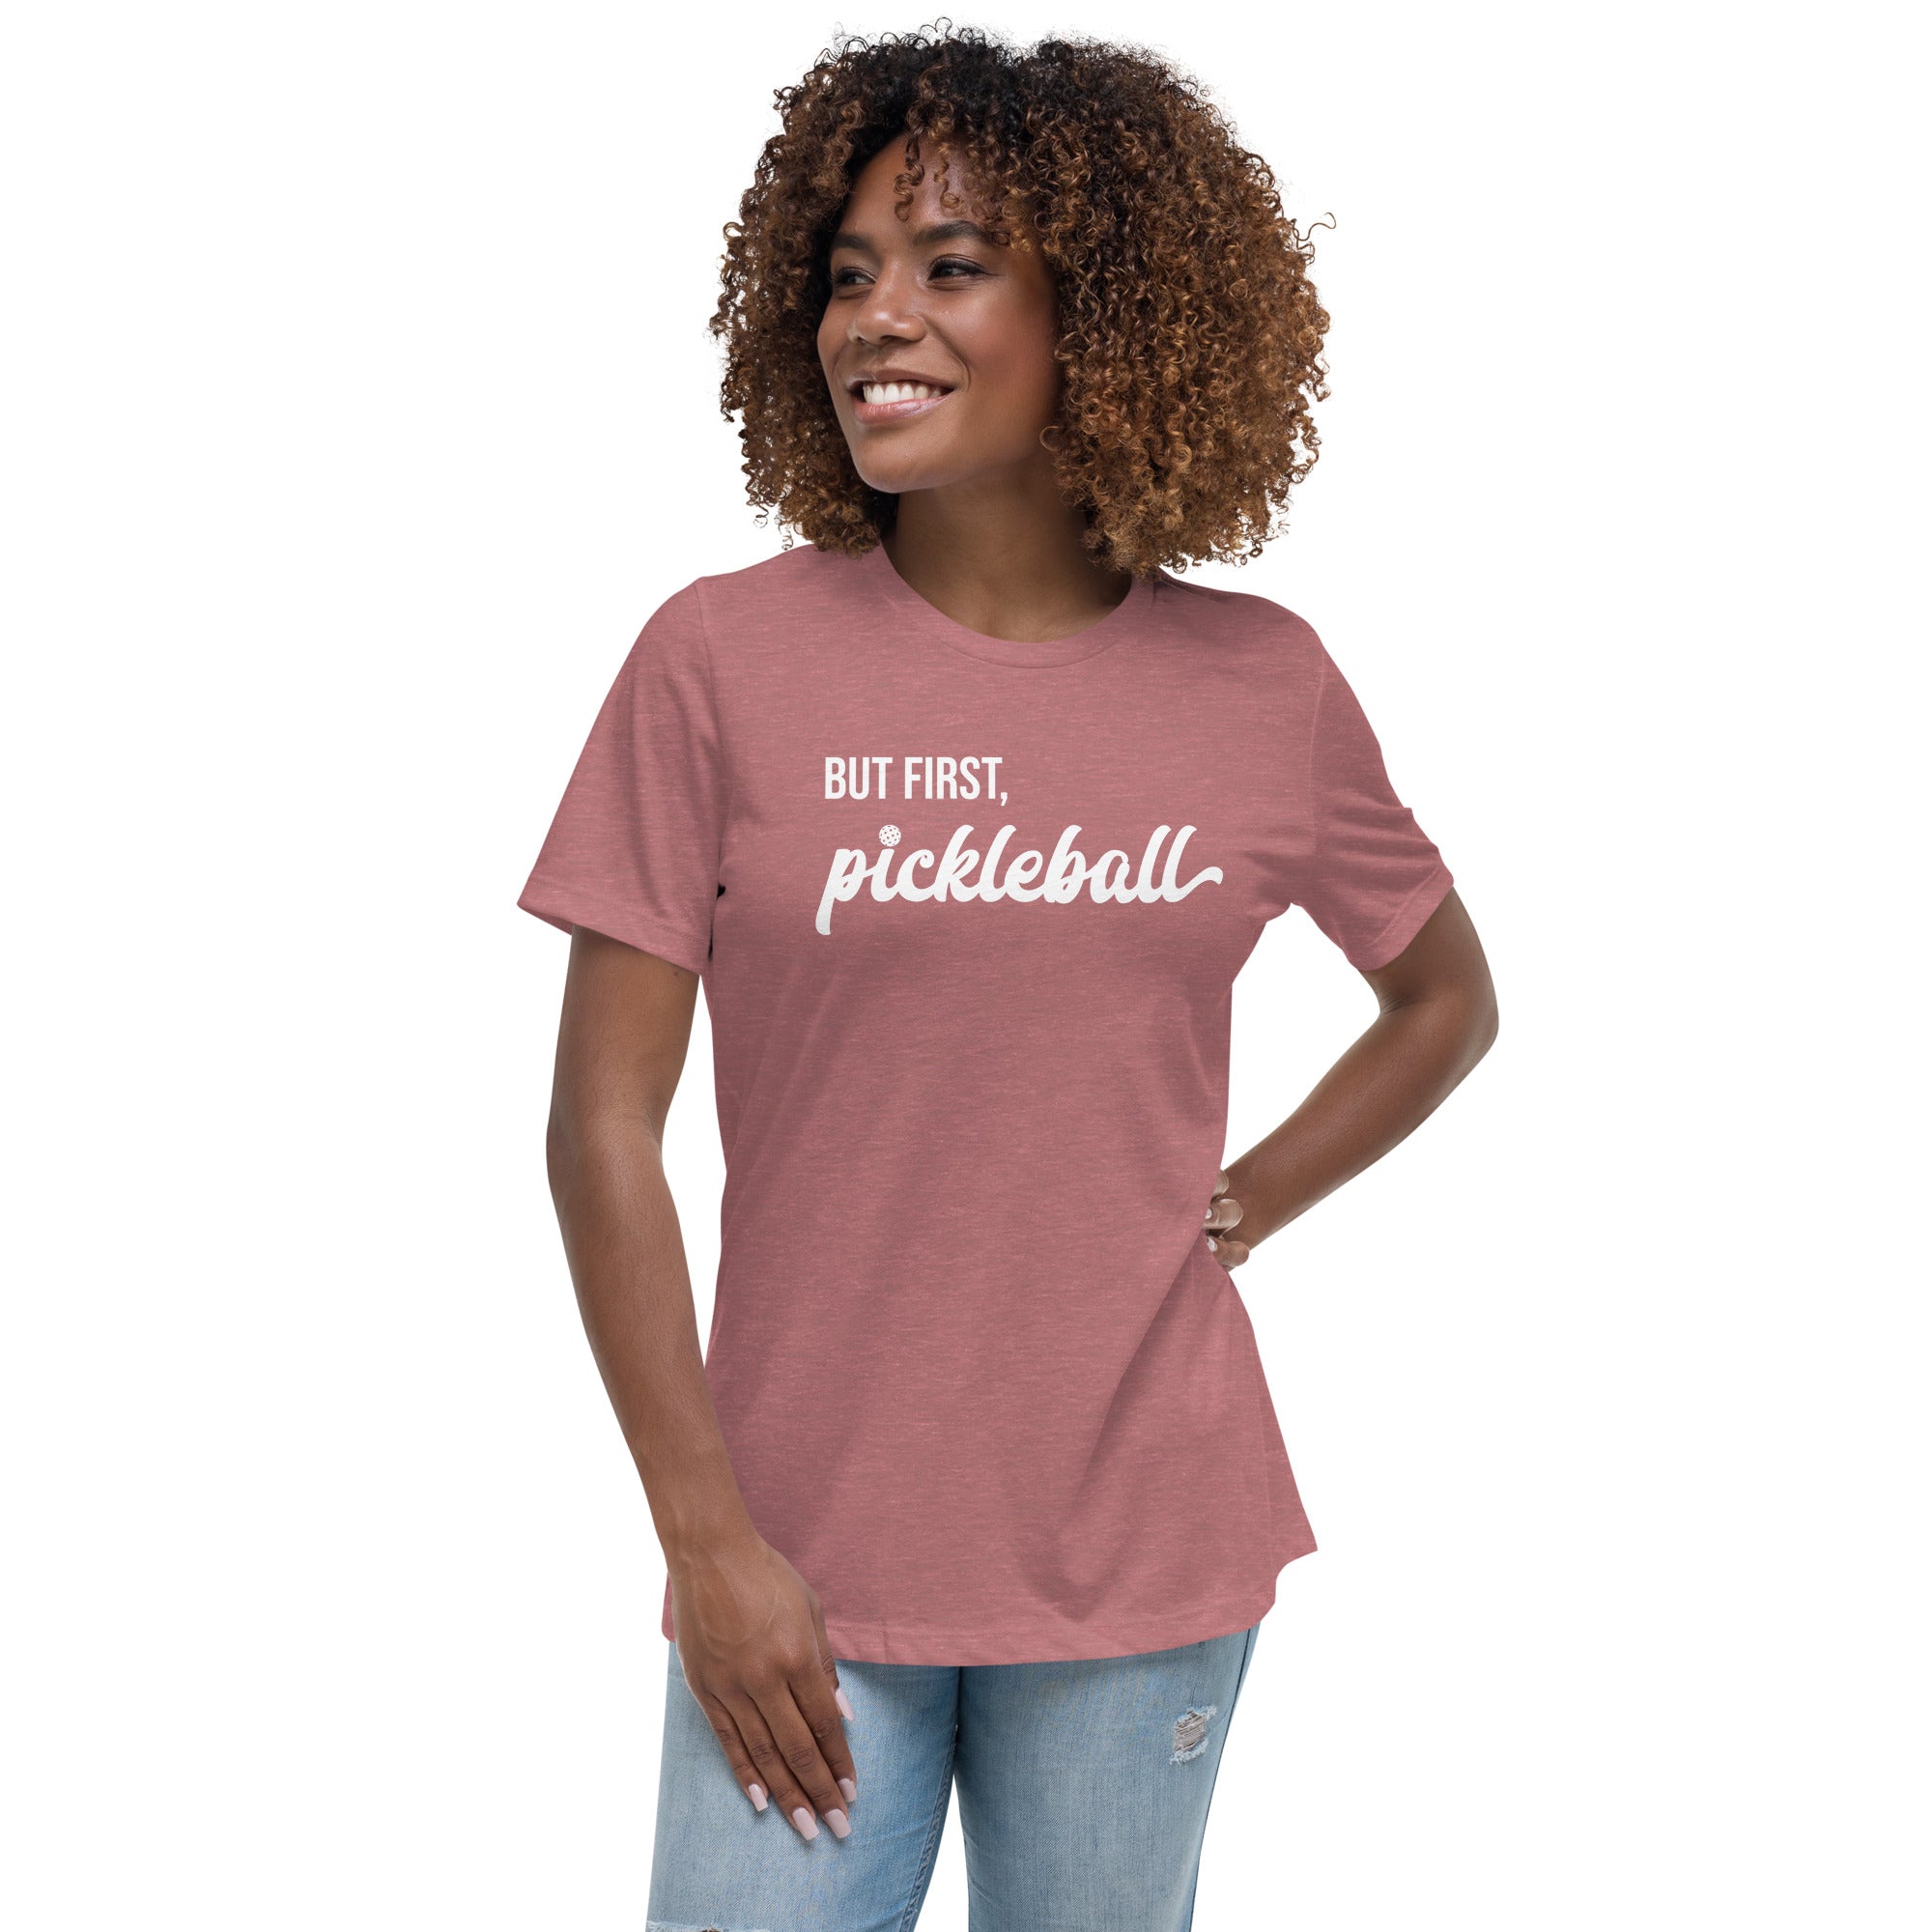 smiling woman with curly hair wearing toasted mauve women's but first pickleball shirt apparel front view